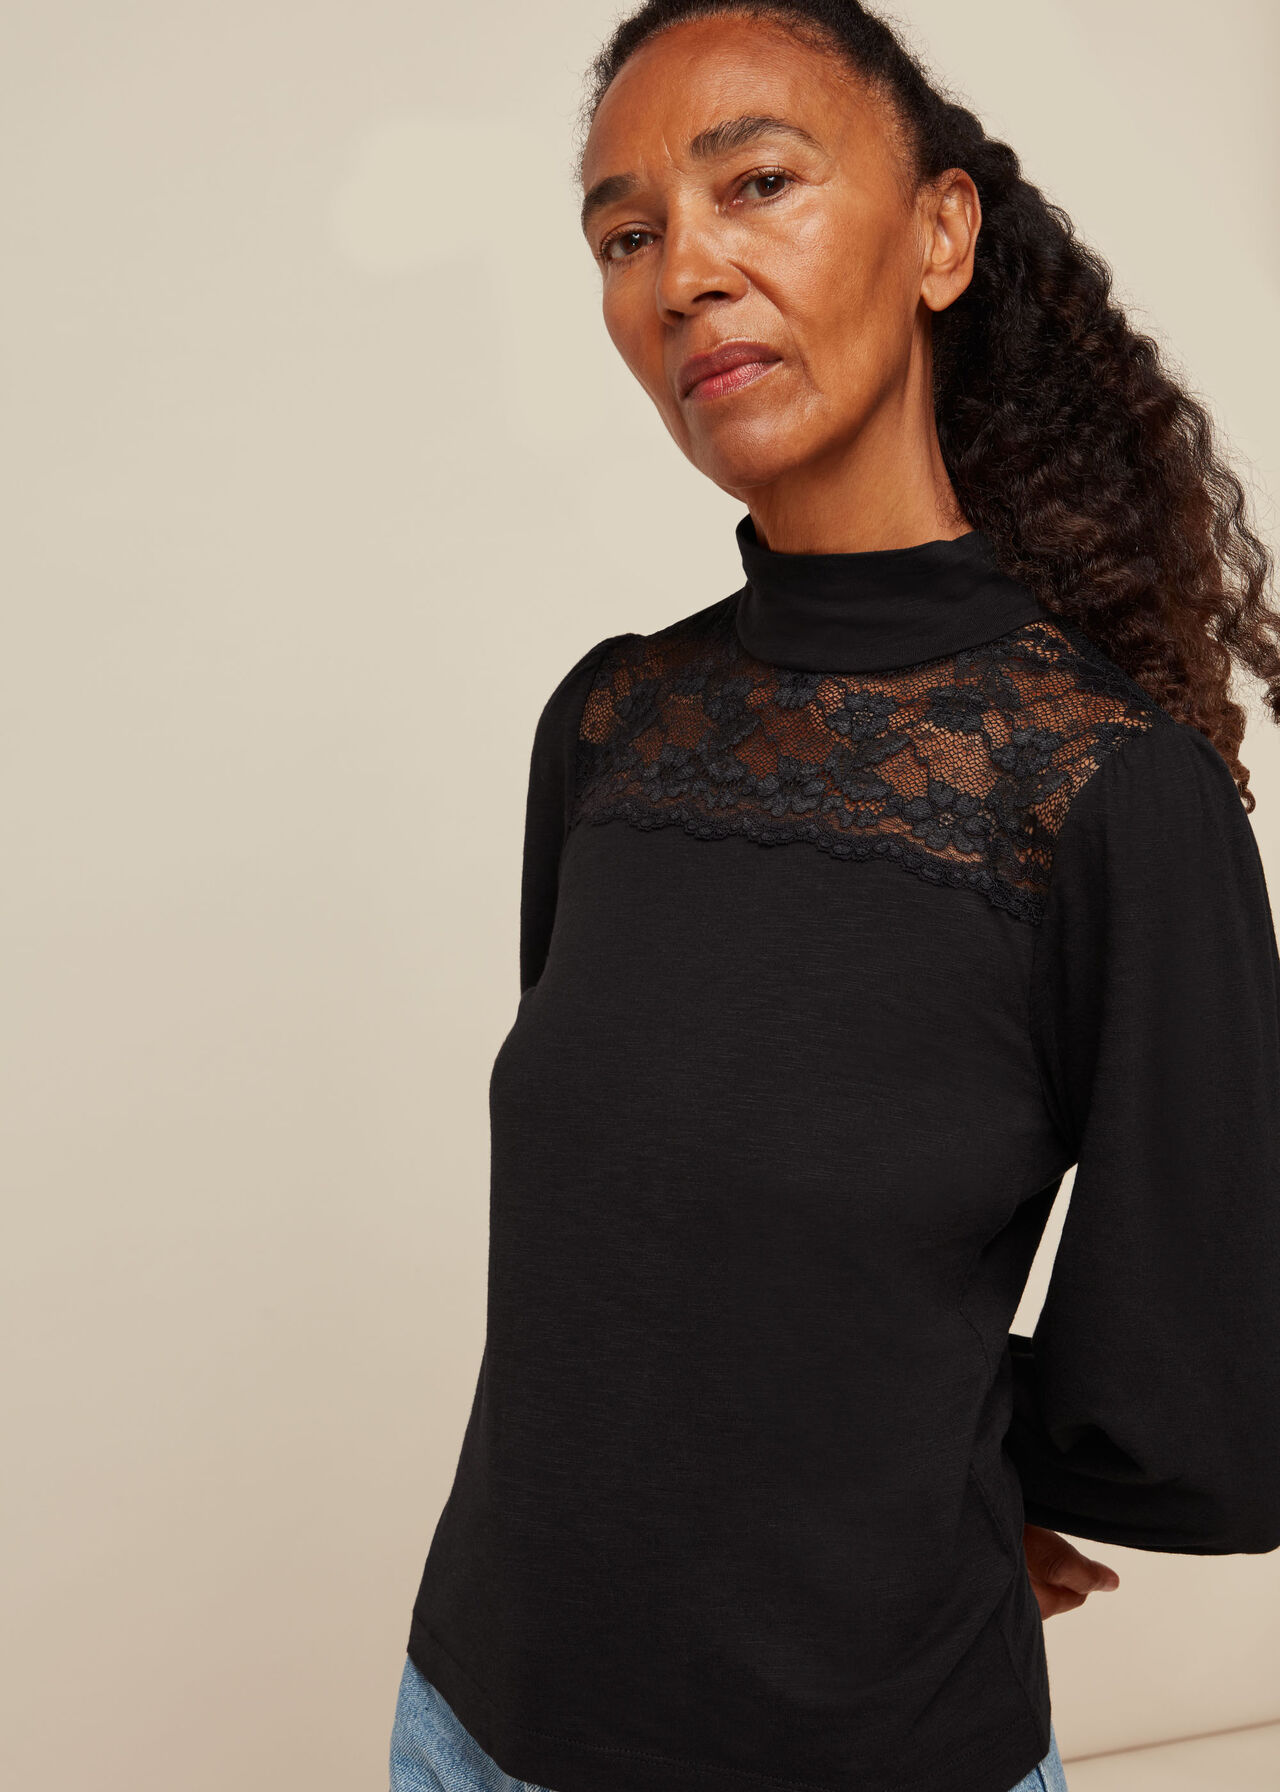 Black Lace Insert Top, WHISTLES